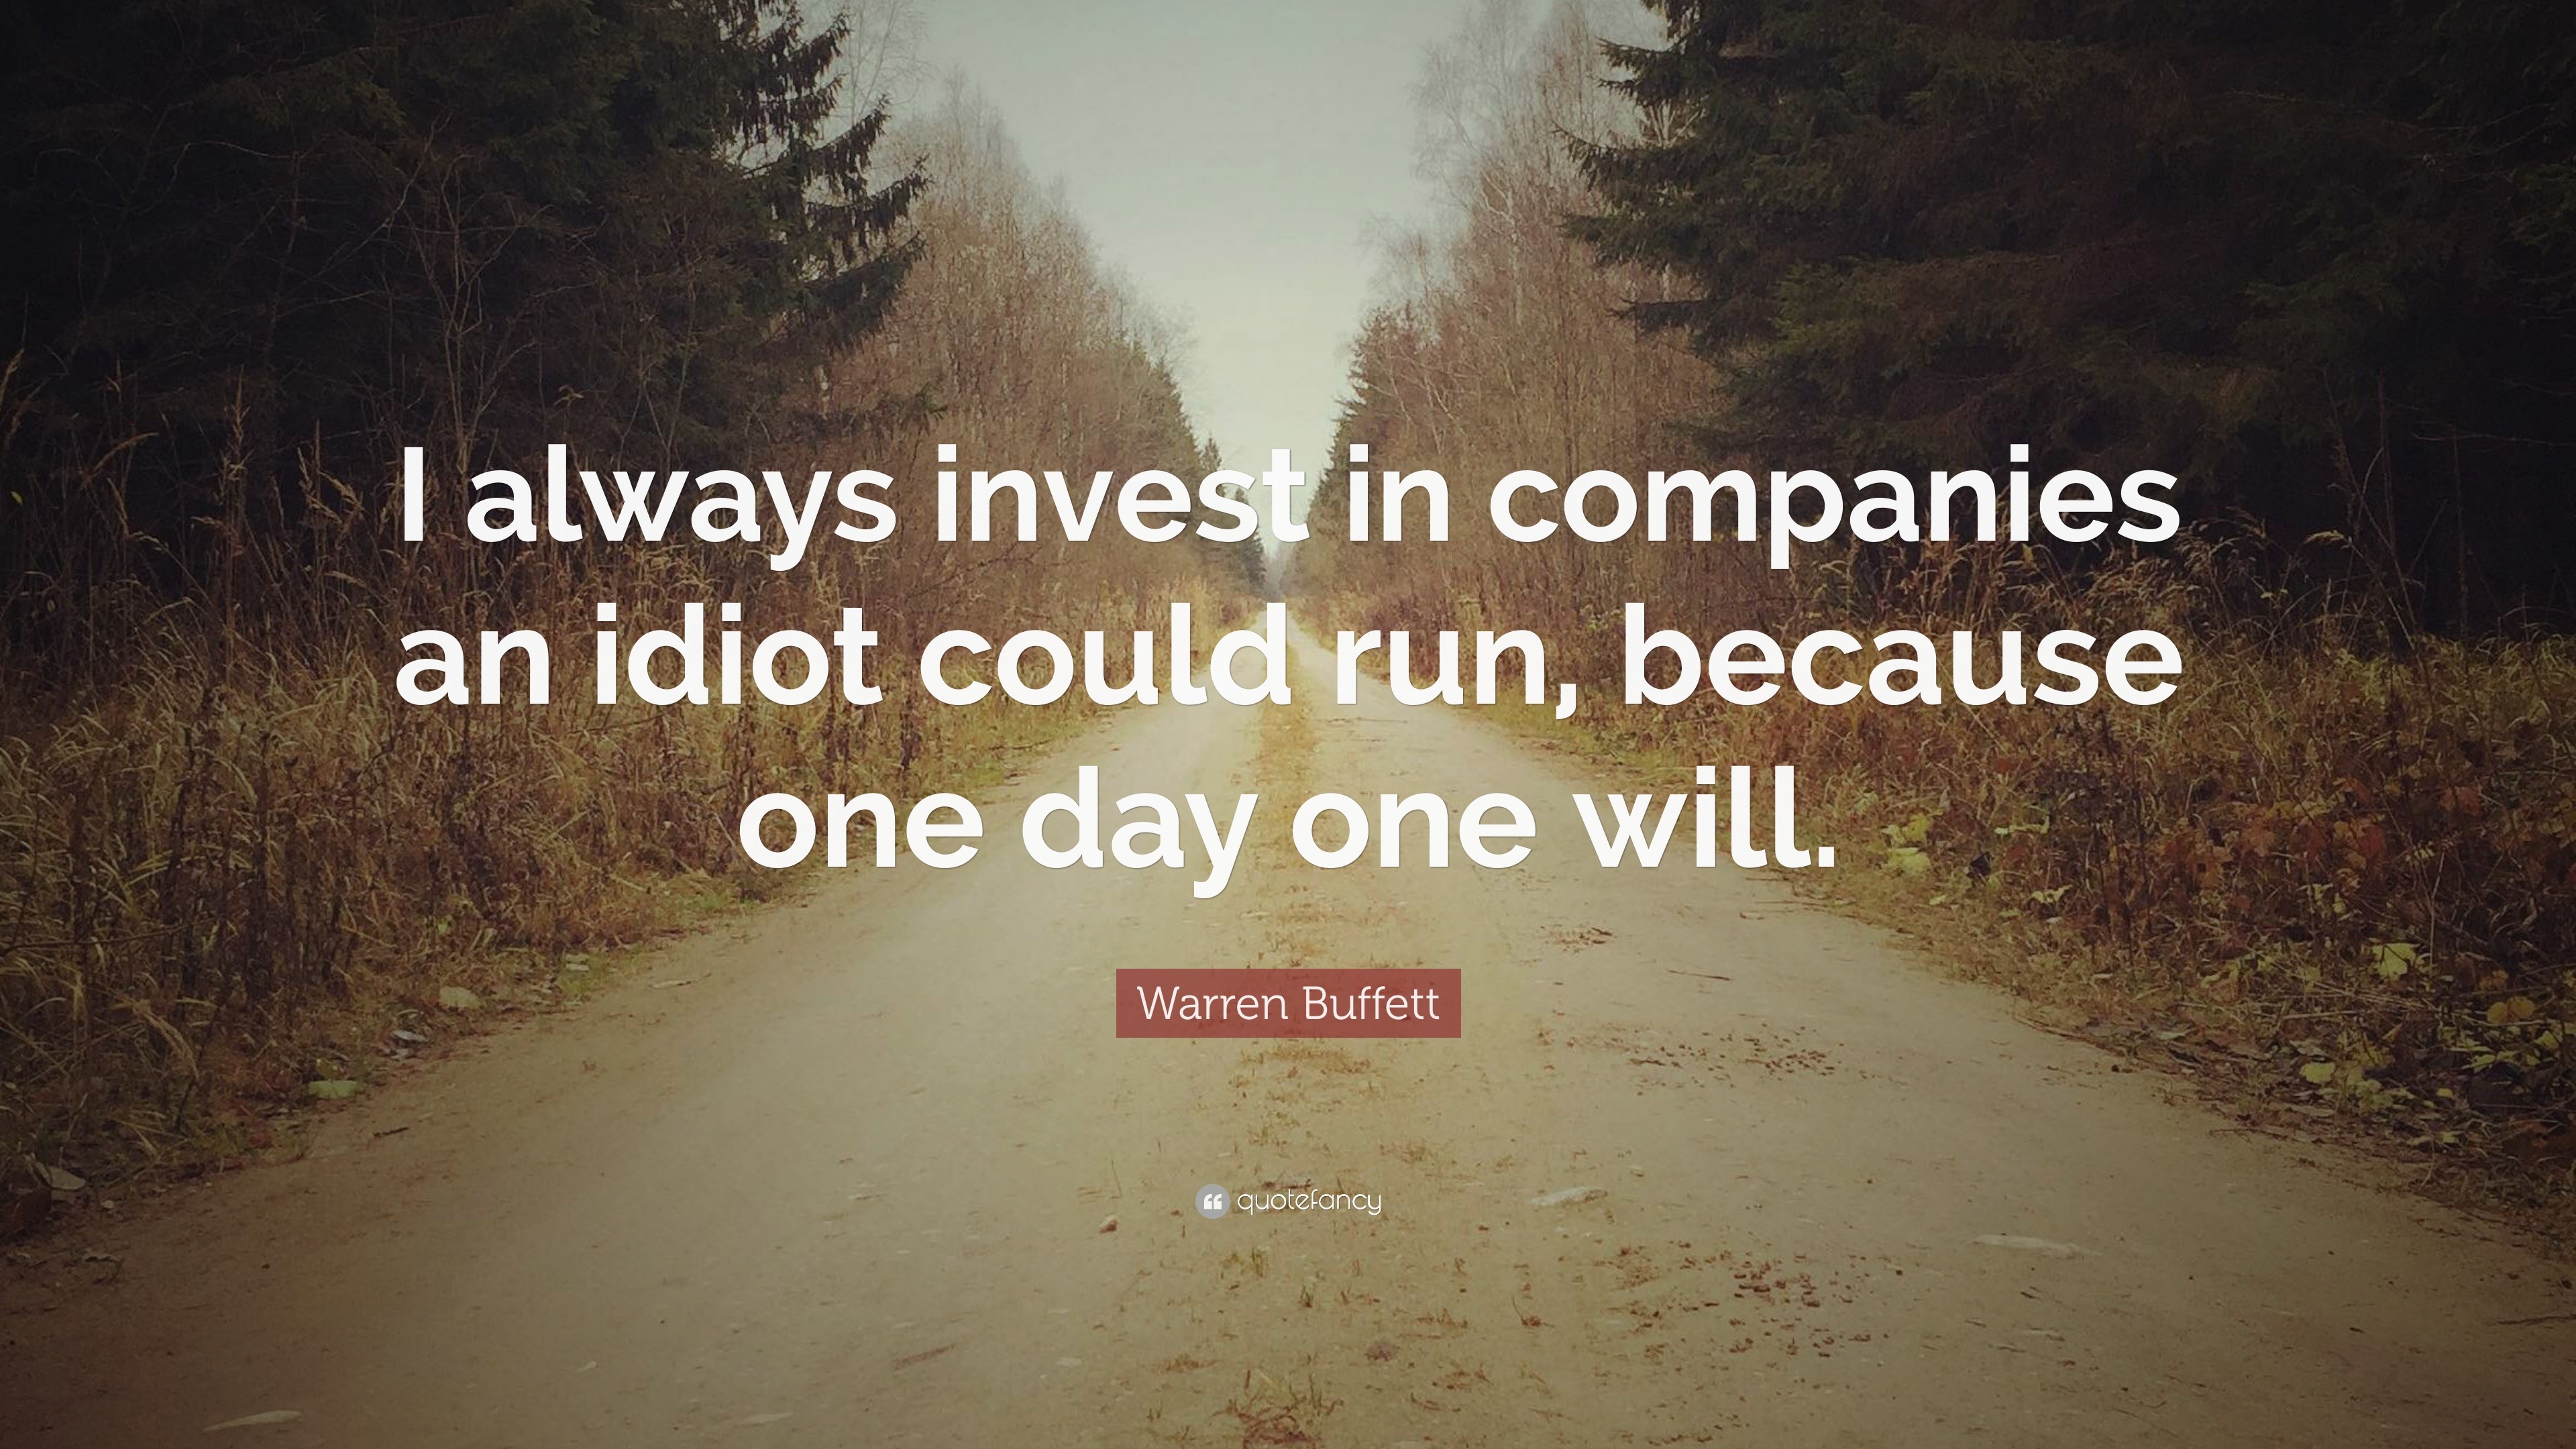 Warren Buffett Quote: “I always invest in companies an idiot could run ...